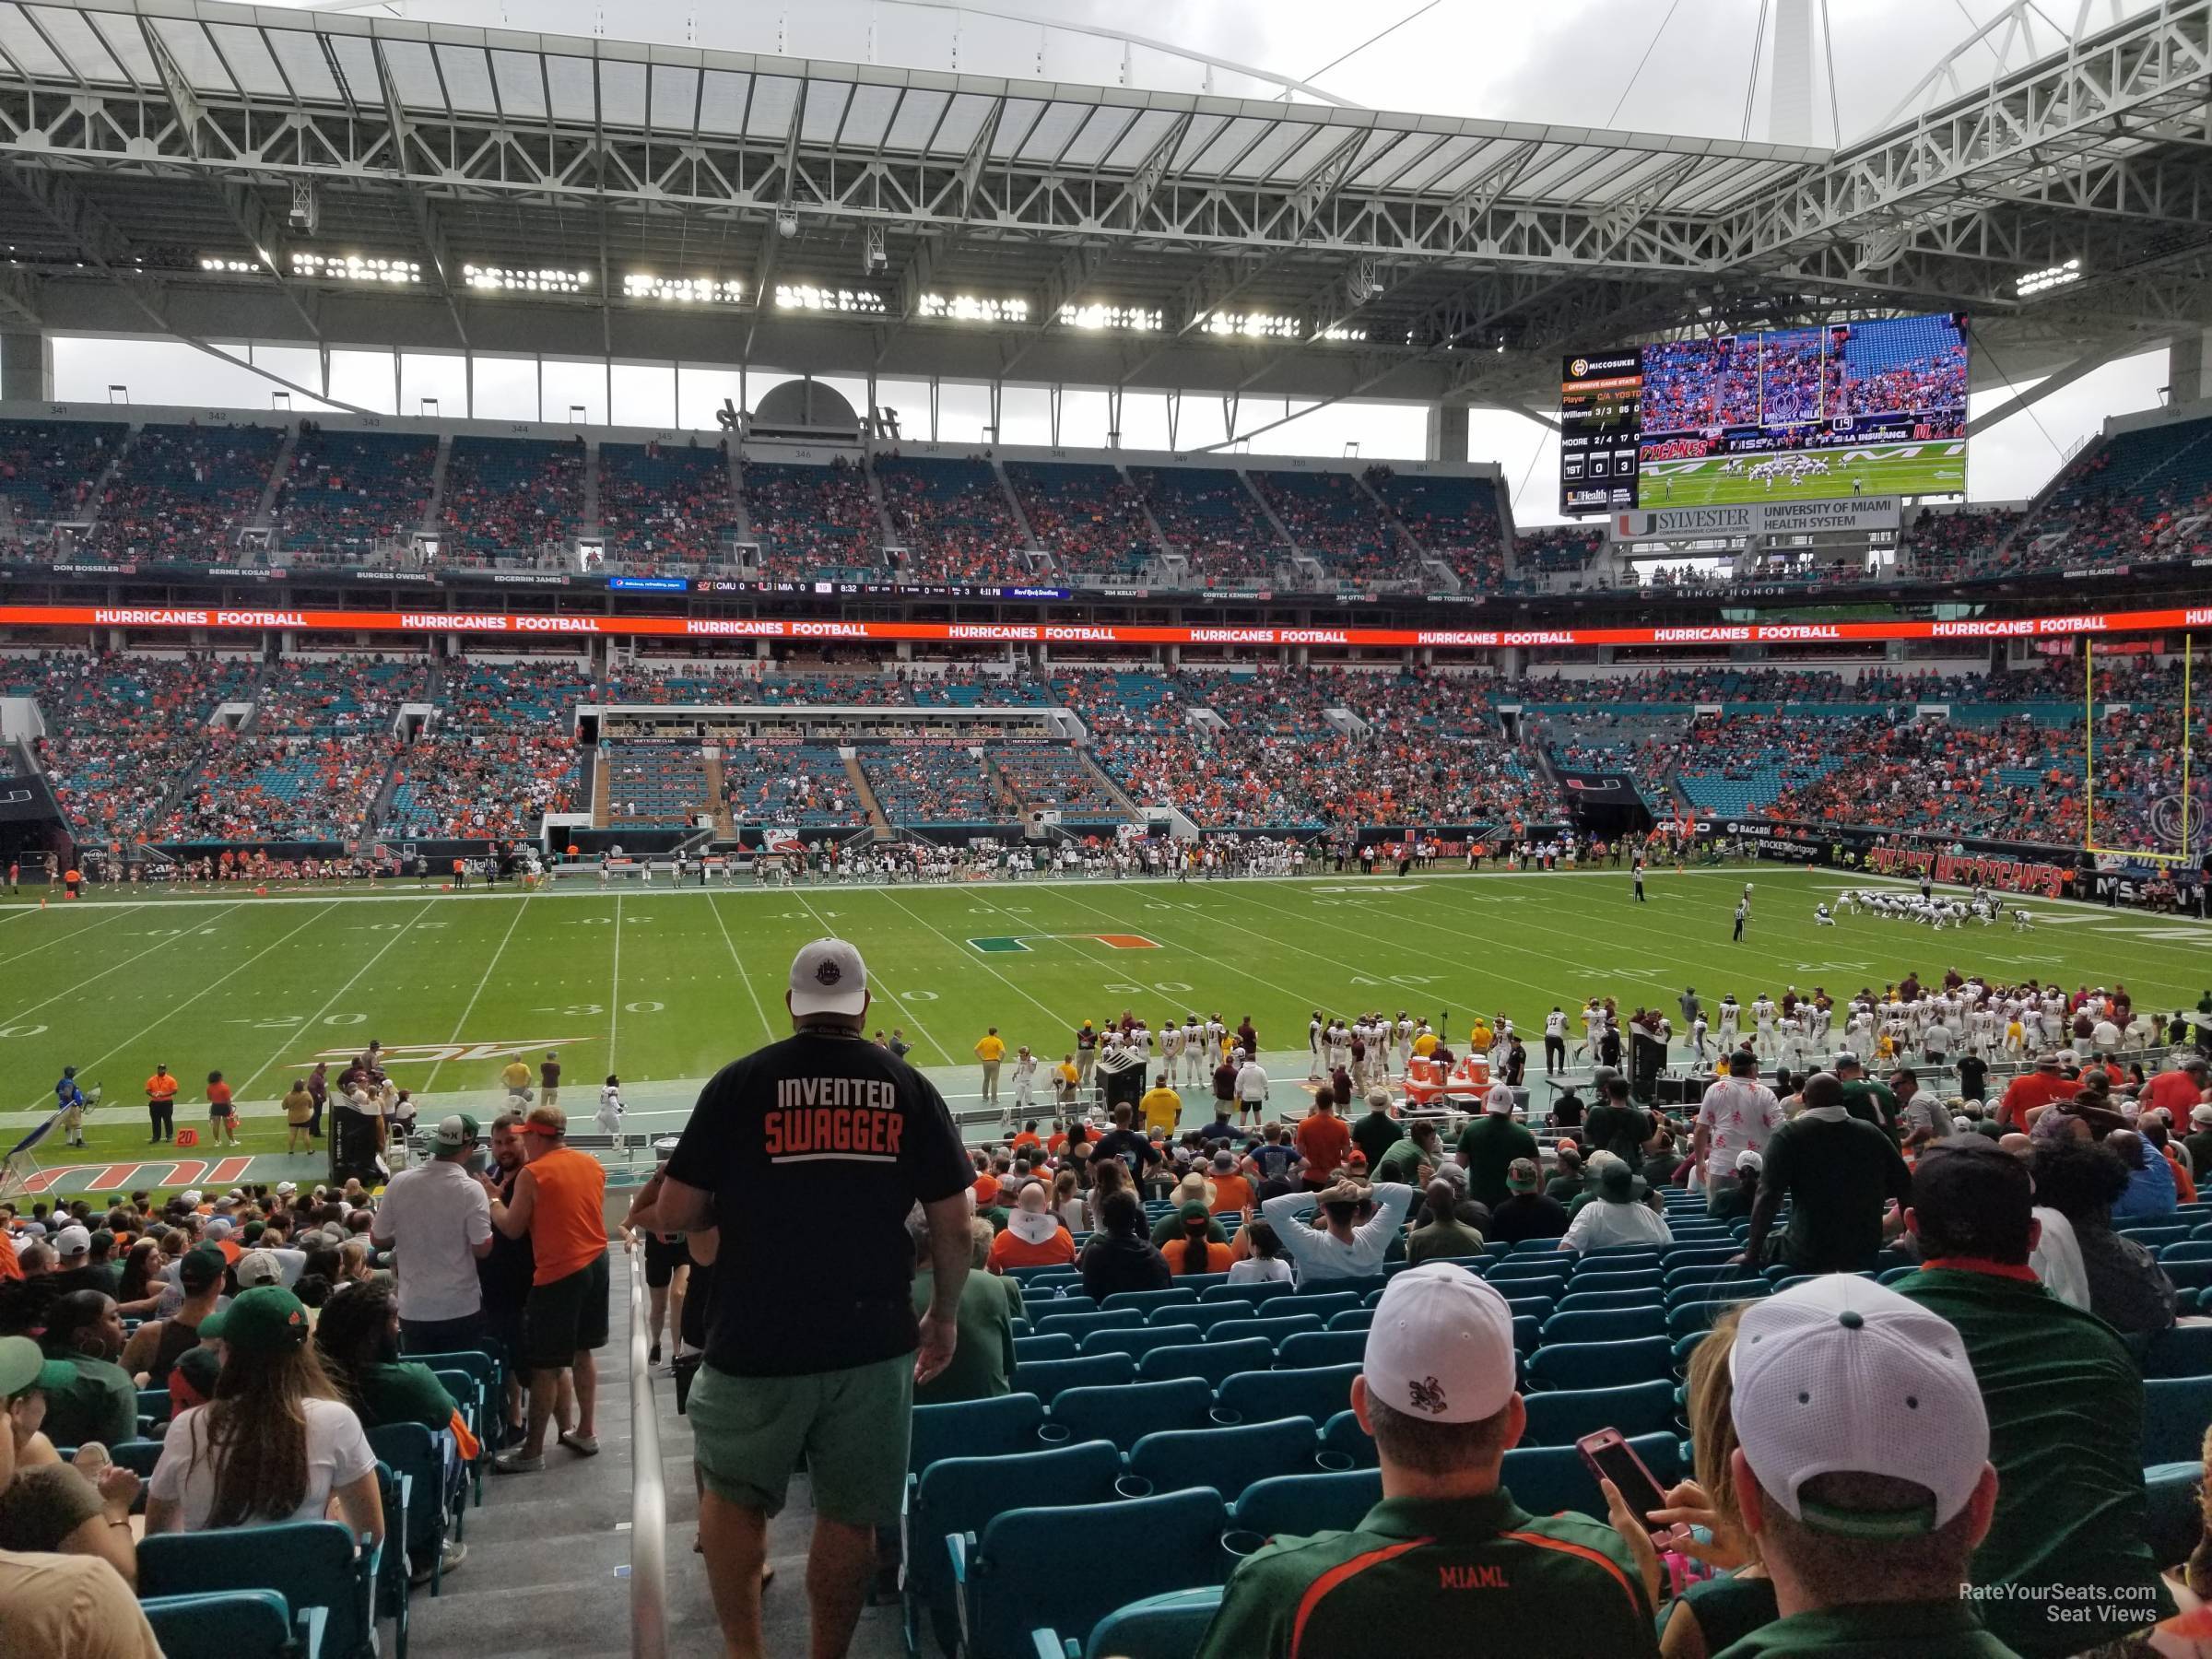 section 119, row 36 seat view  for football - hard rock stadium